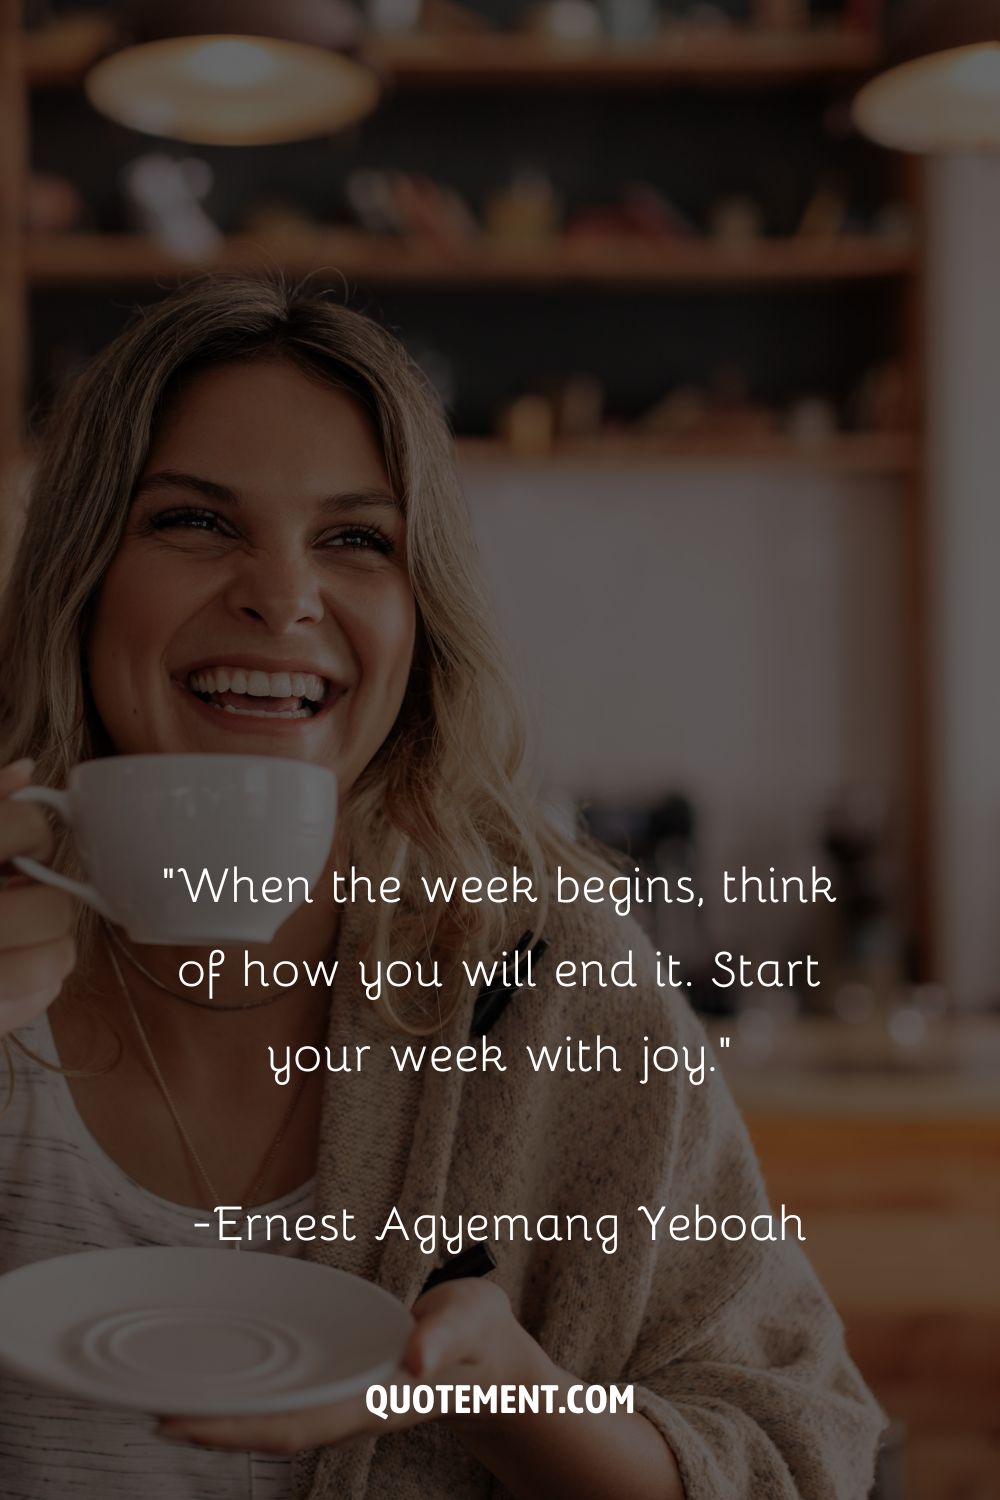 A blonde woman smiling and holding a cup representing the top new week quote